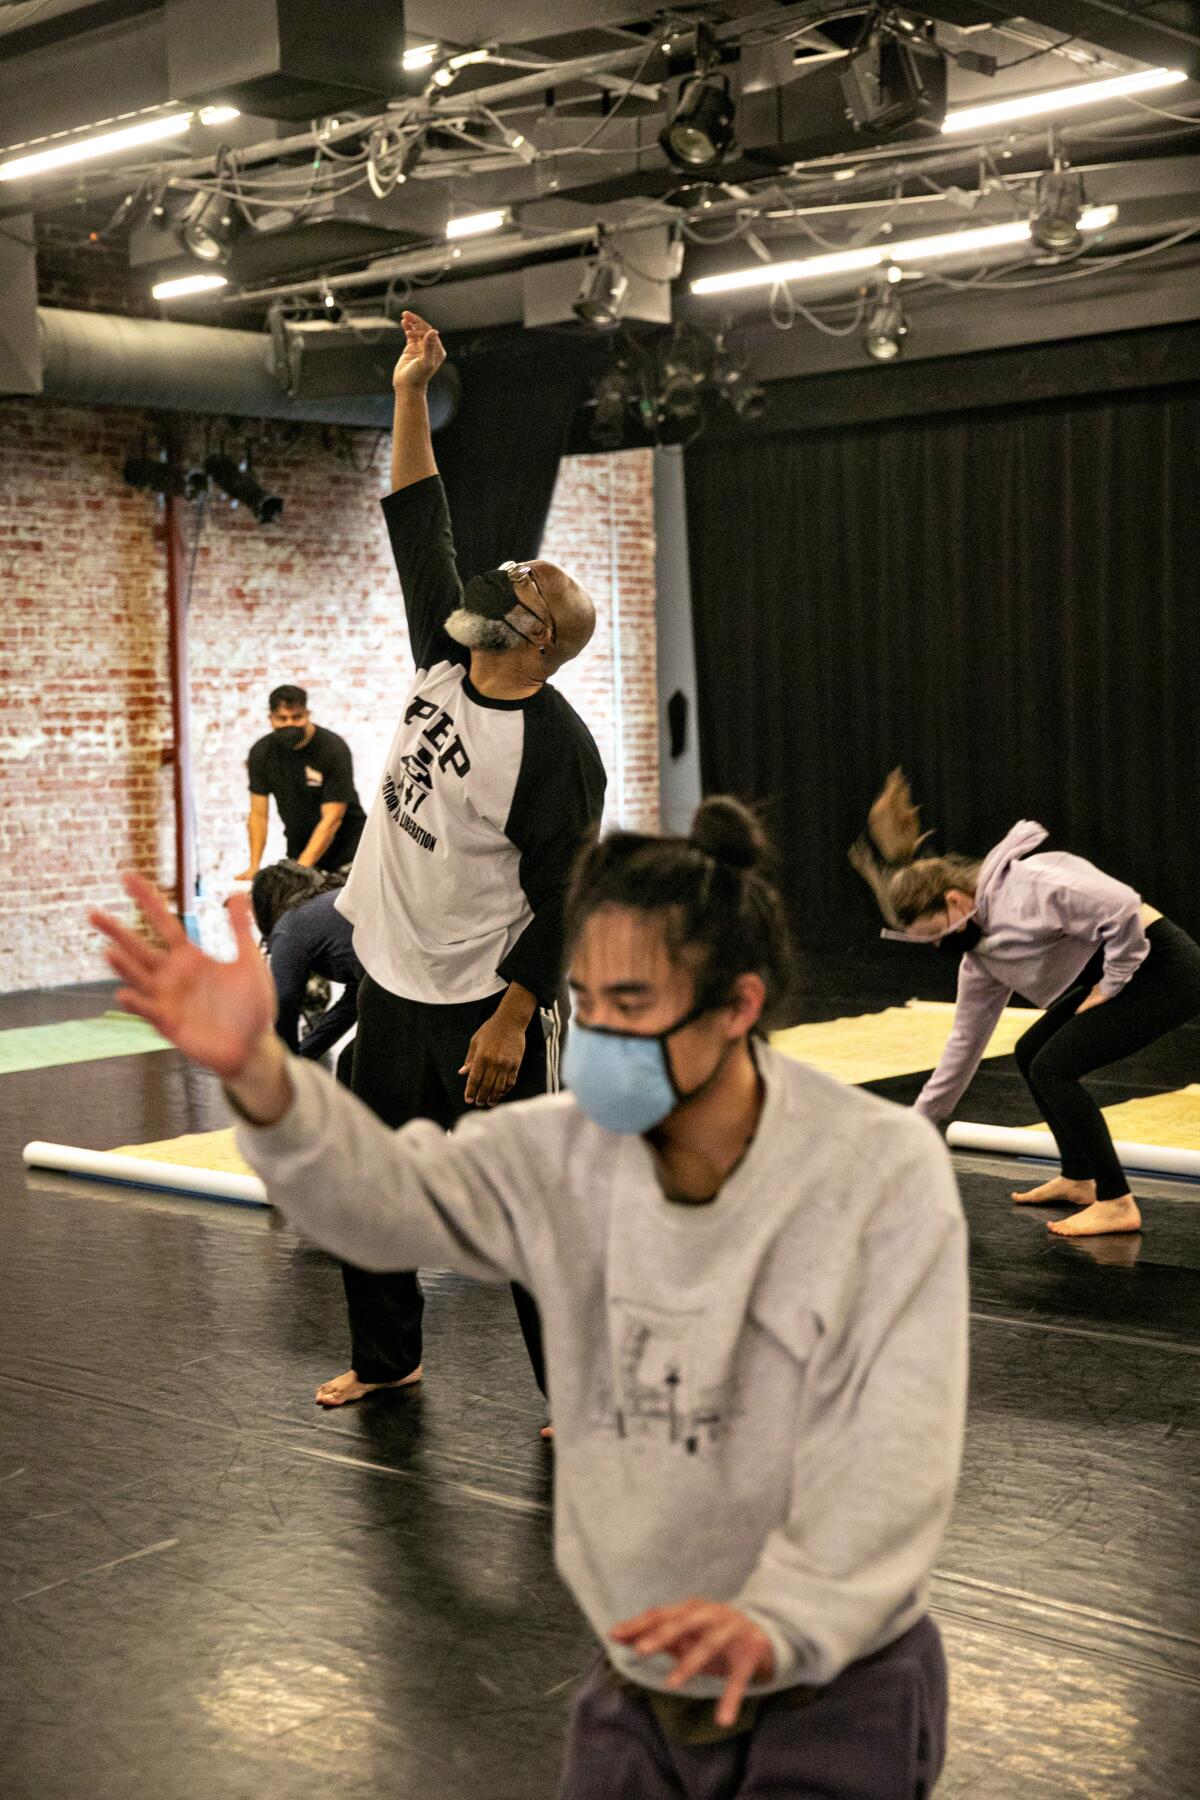 A dancer gestures in a rehearsal studio.